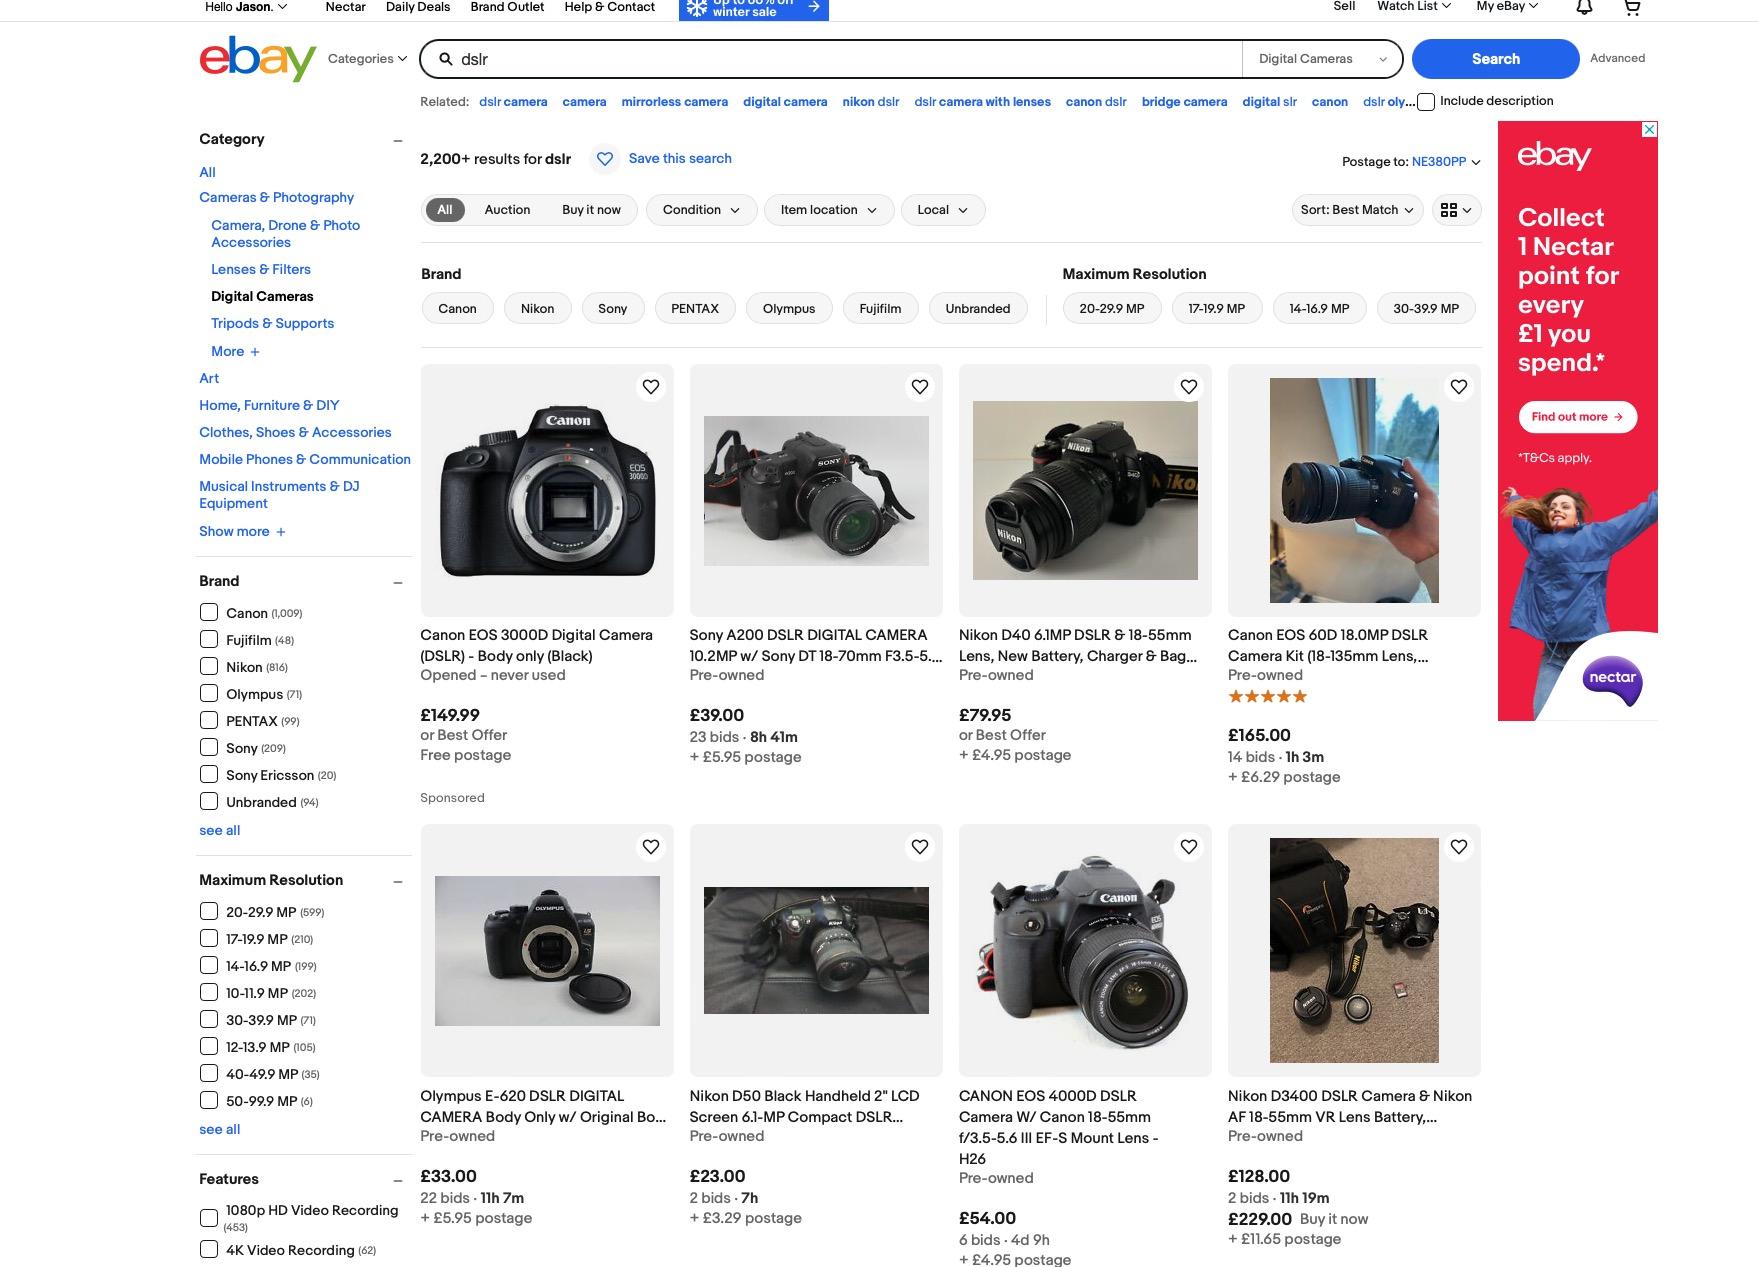 Screenshot of DSLRs on sale on the Ebay auction site